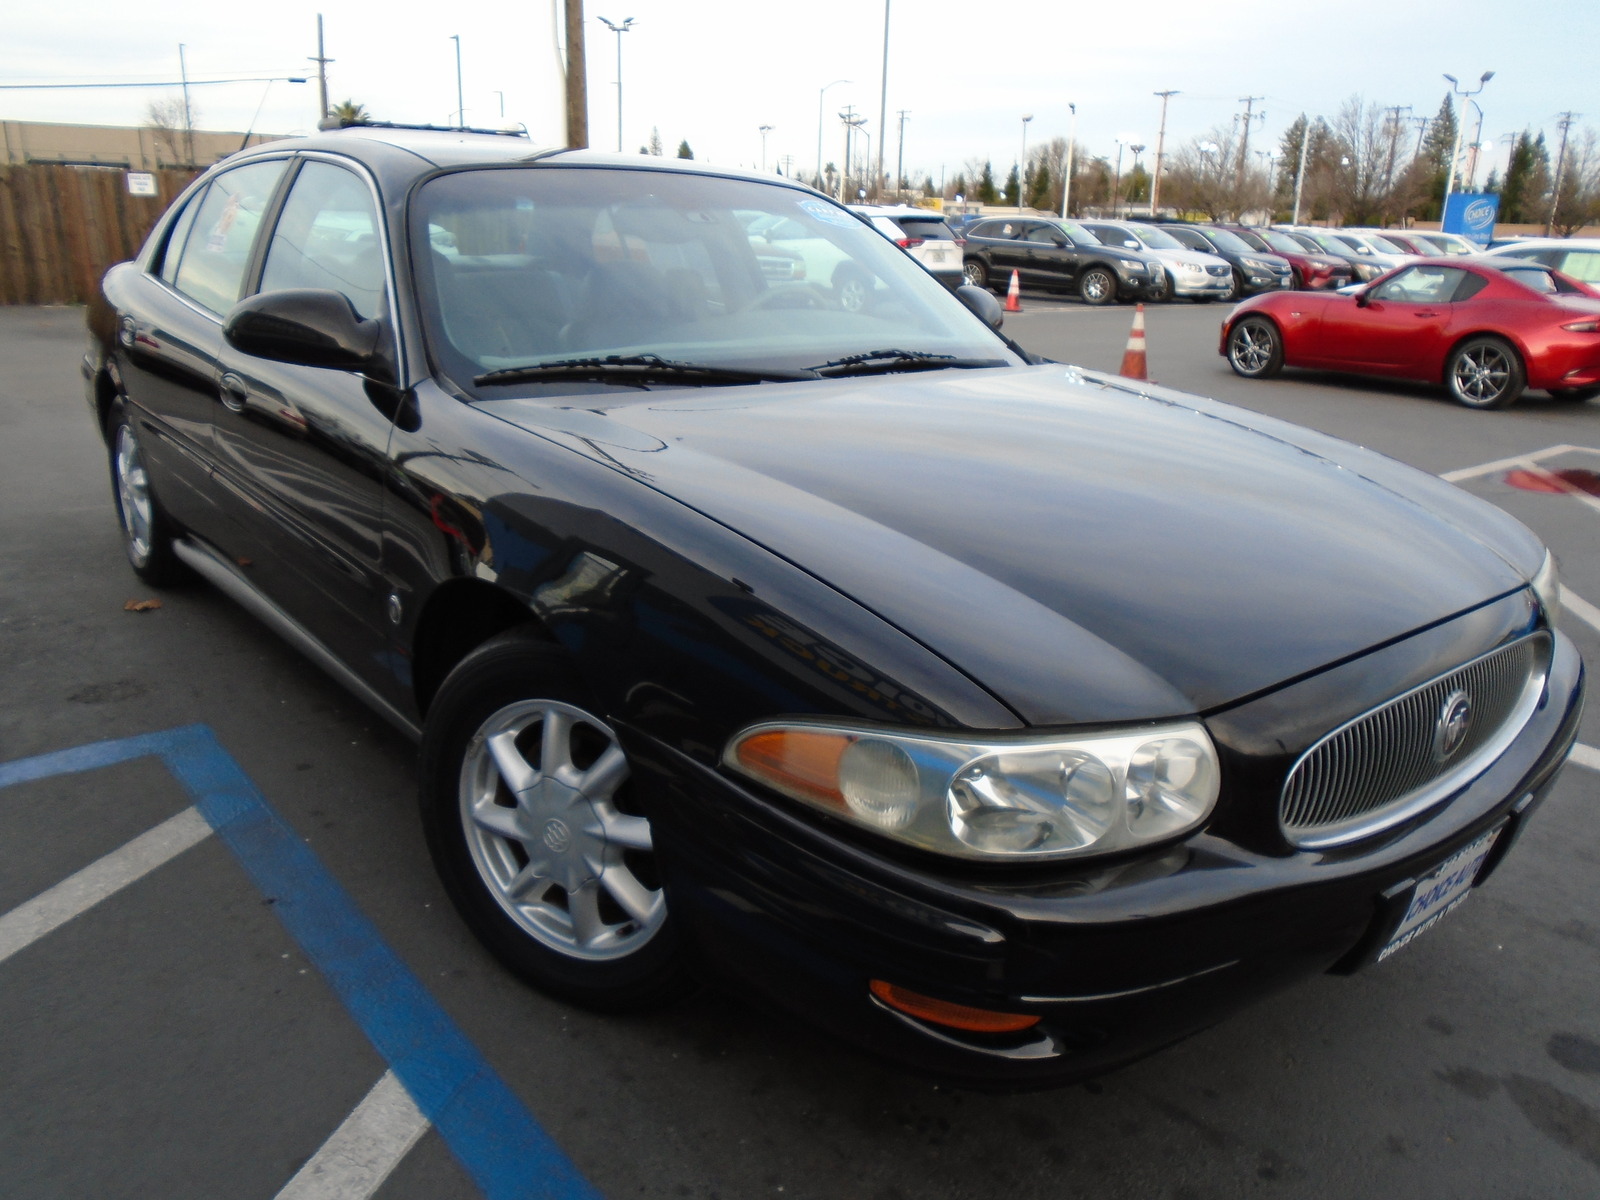 Used 2003 Buick Le Sabre for Sale Right Now - Autotrader